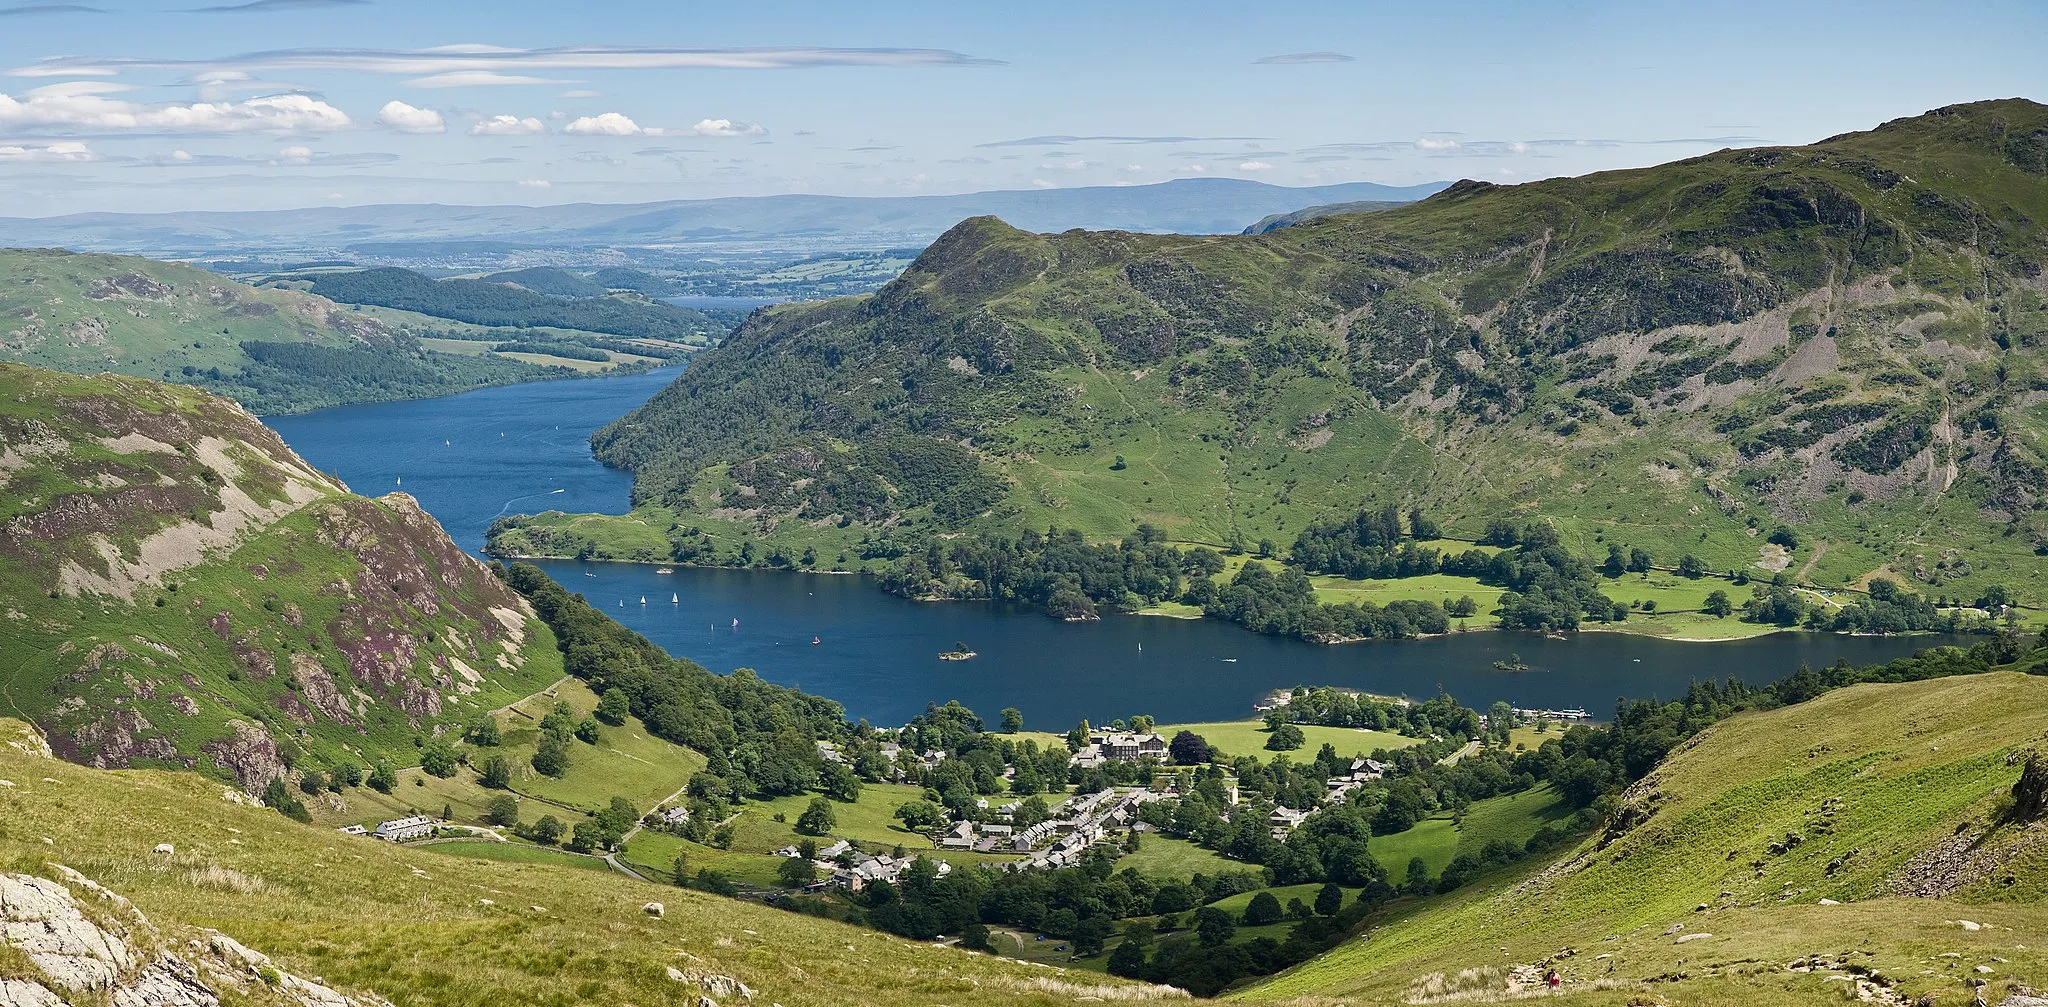 Photo showing: The village of Glenridding and Ullswater in the Lake District, Cumbria, England. This view is looking east from the hills at the start of the ascent to Helvellyn.